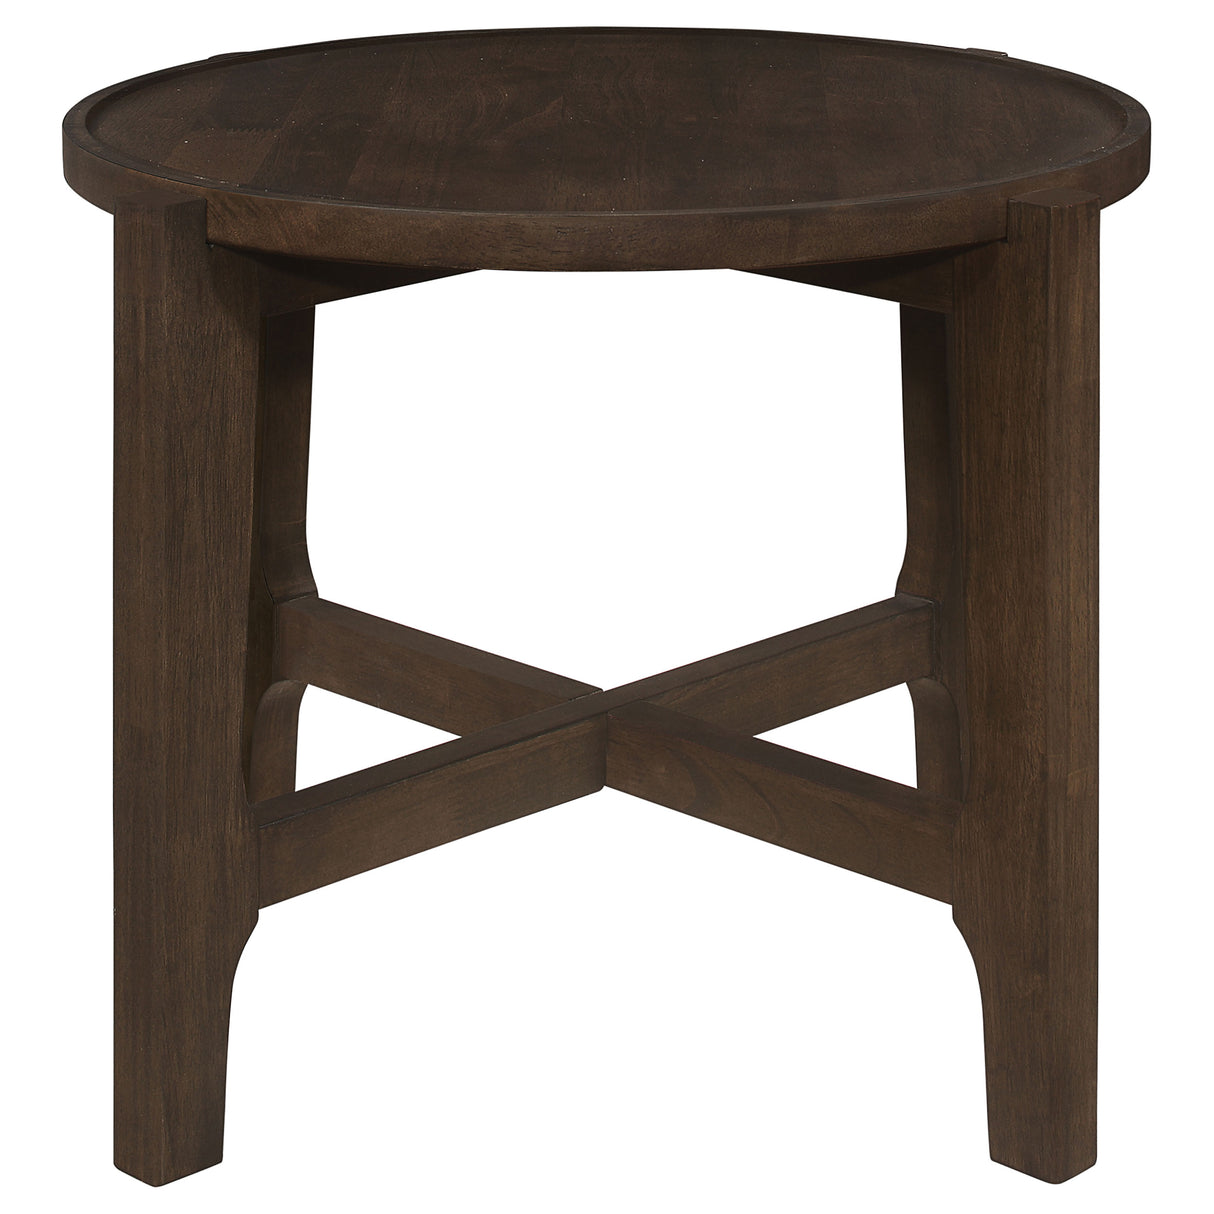 End Table - Cota Round Solid Wood End Table Dark Brown